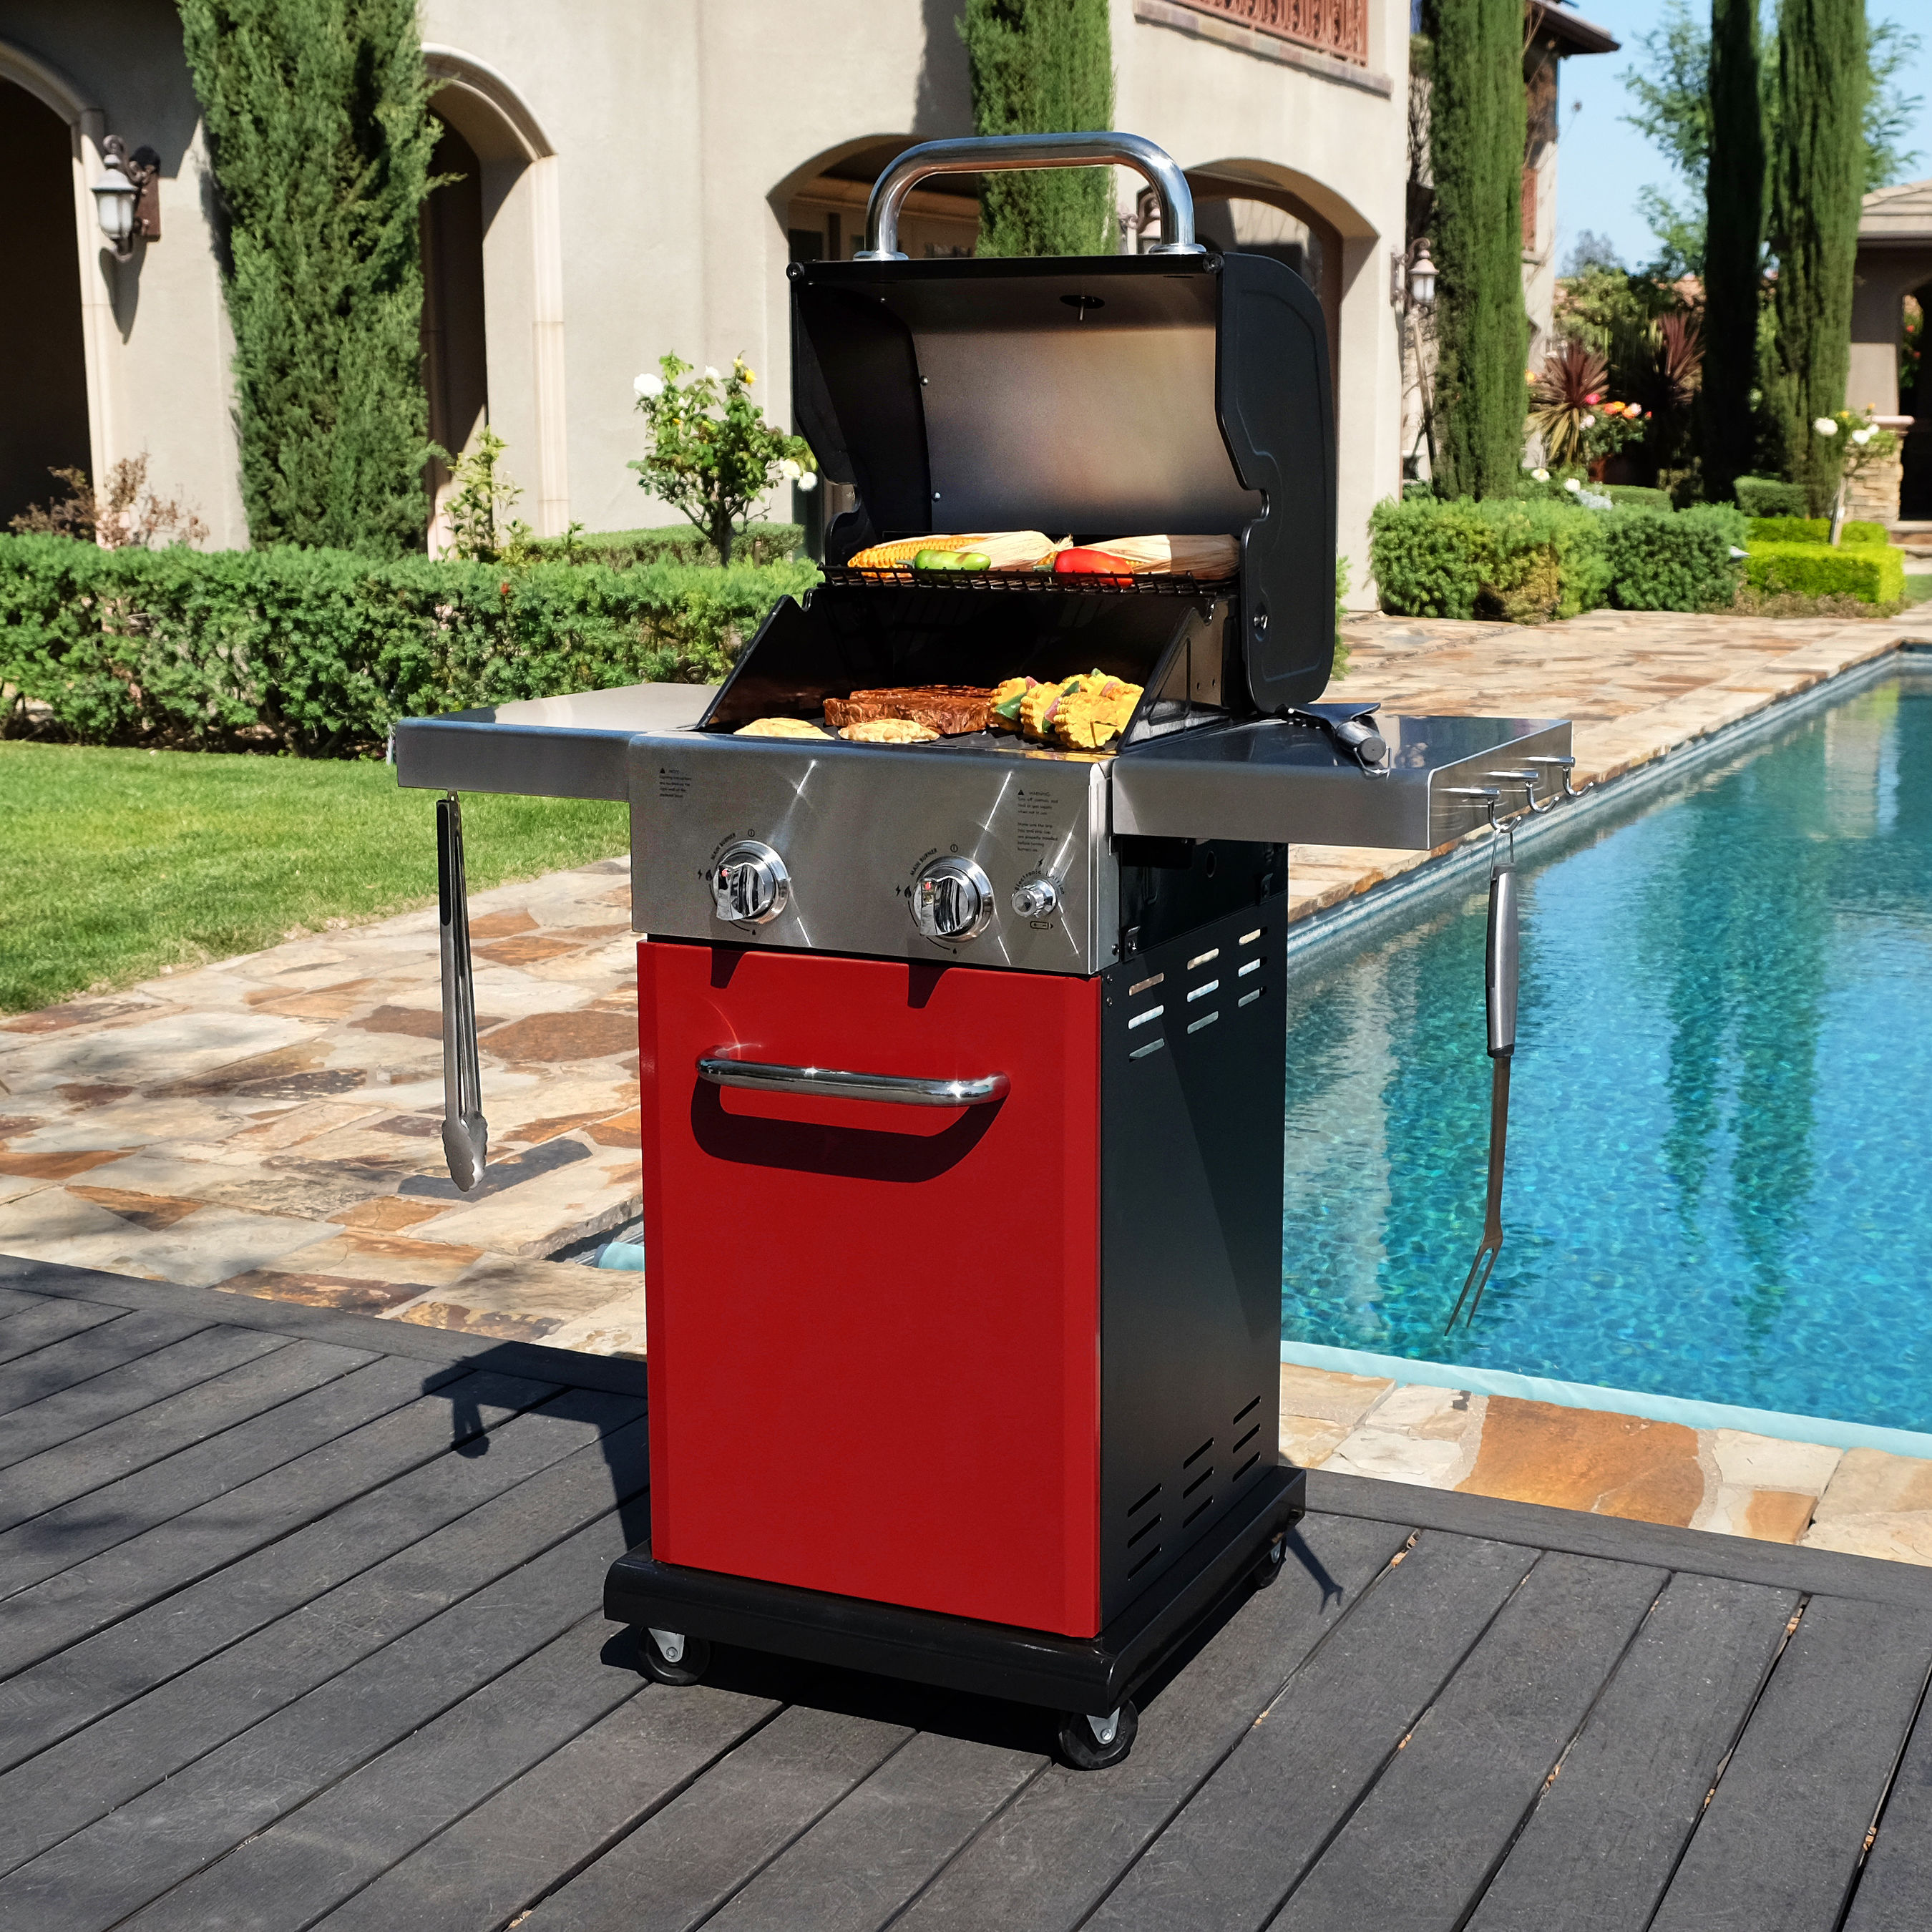 Permasteel Red 2-Burner Liquid Propane Gas Grill in the Grills department at Lowes.com